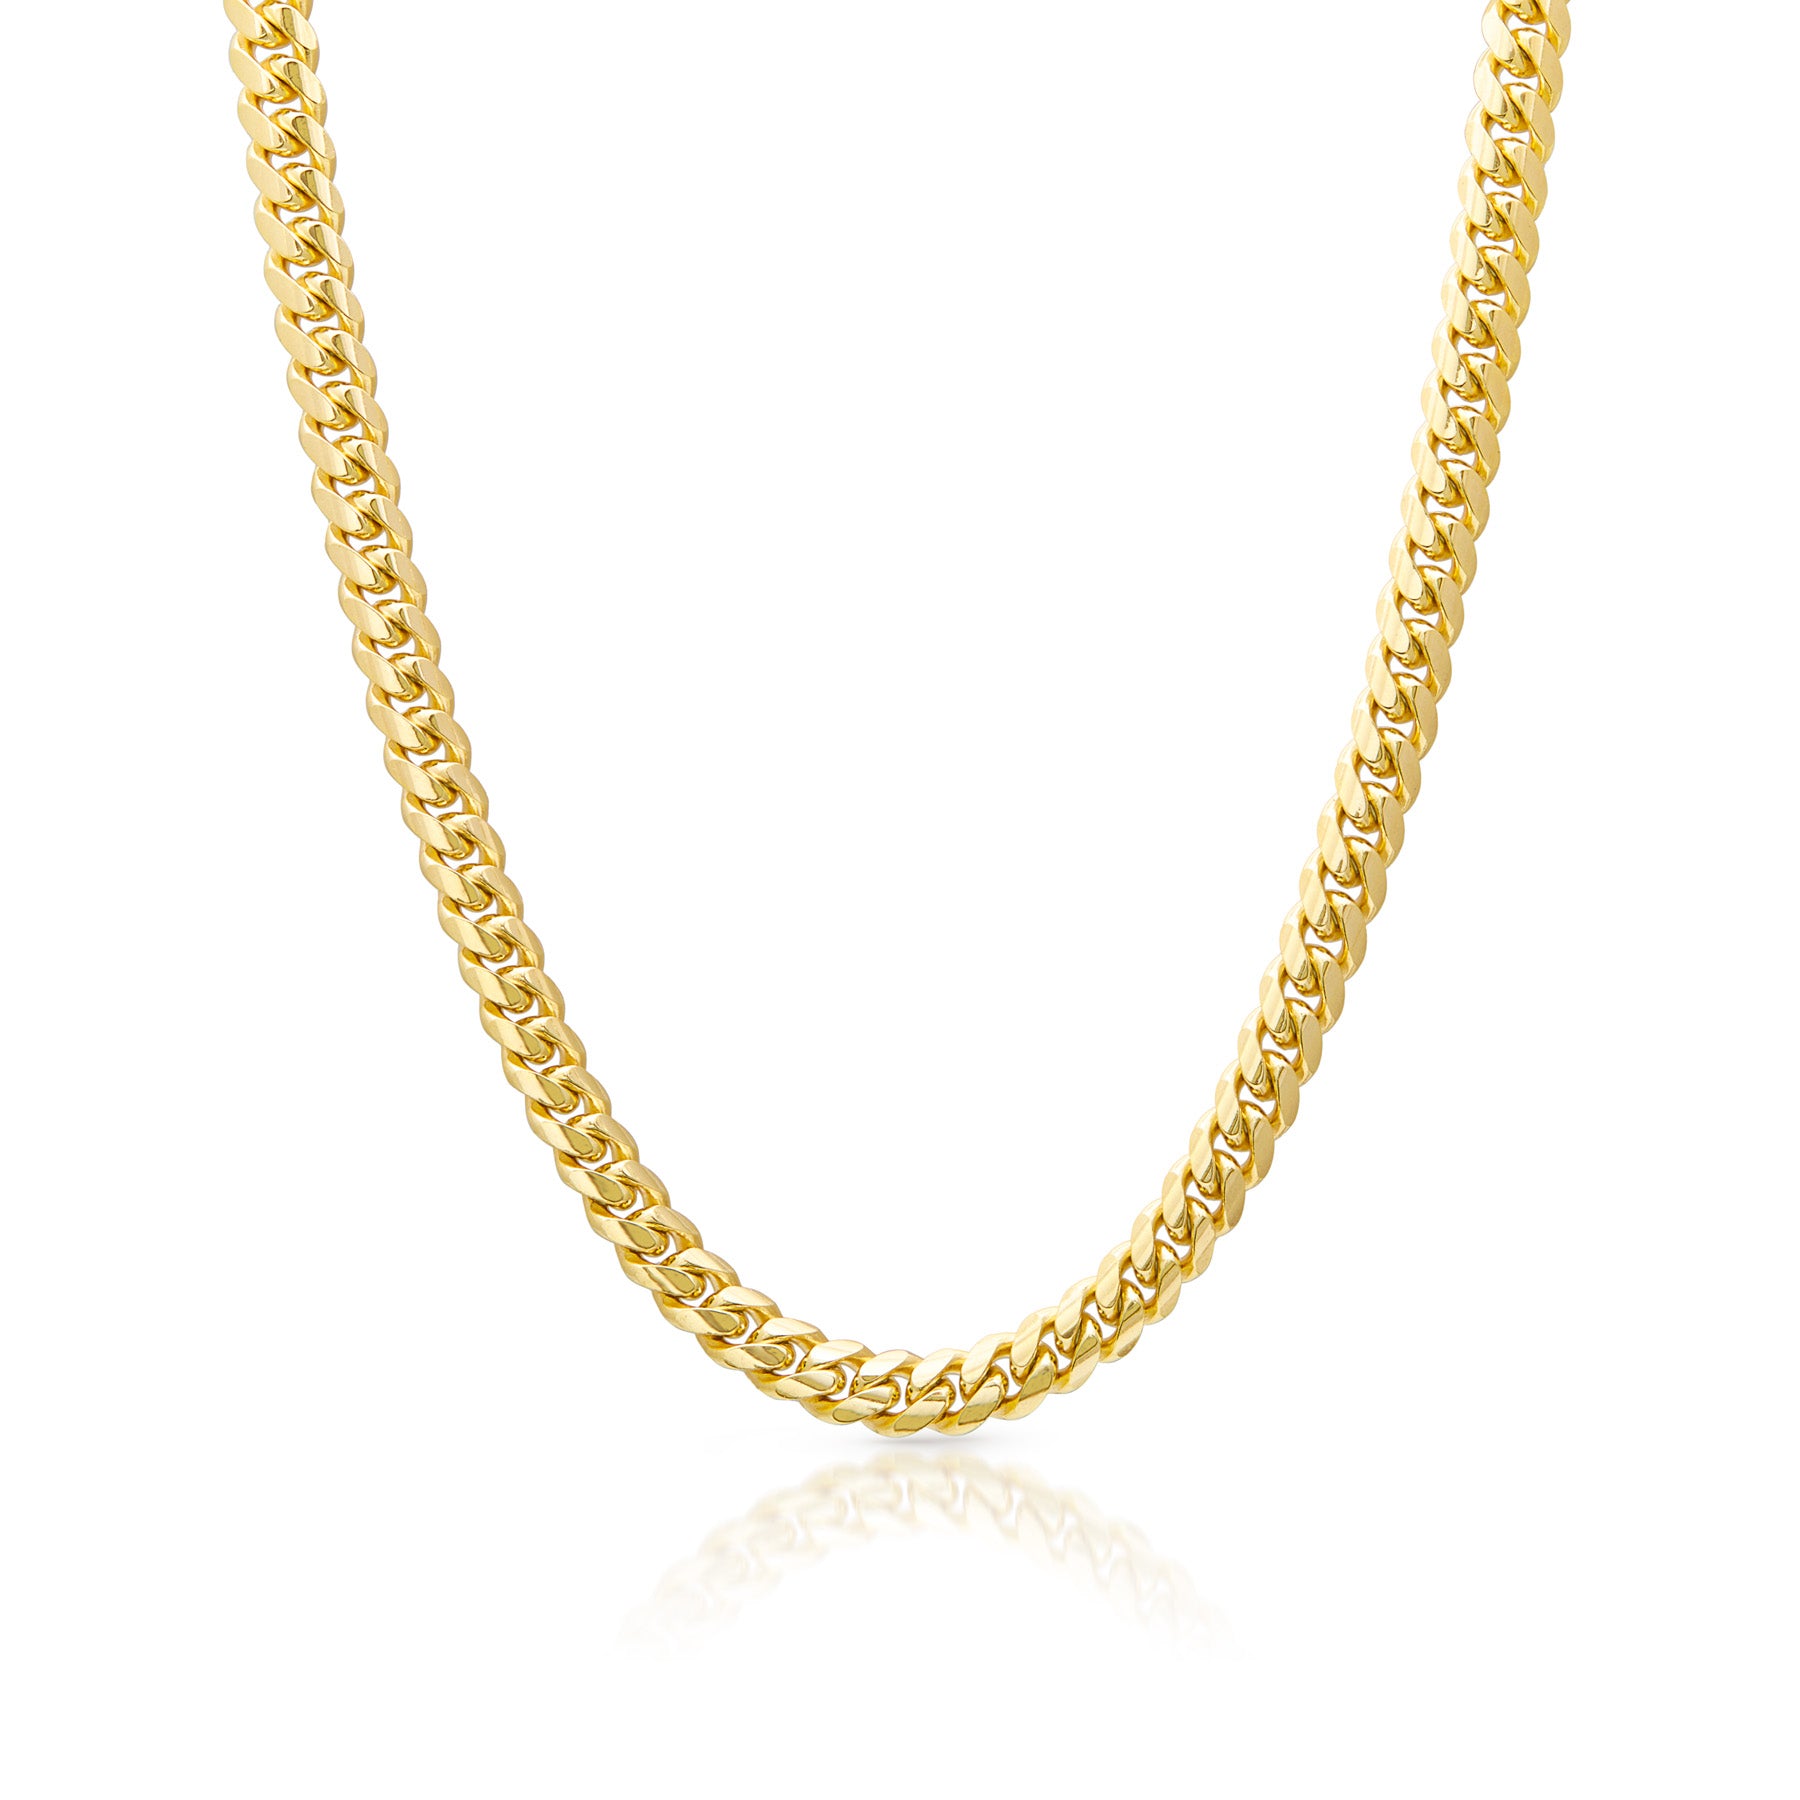 14KT Yellow Gold Cuban Chain Link Beck Necklace